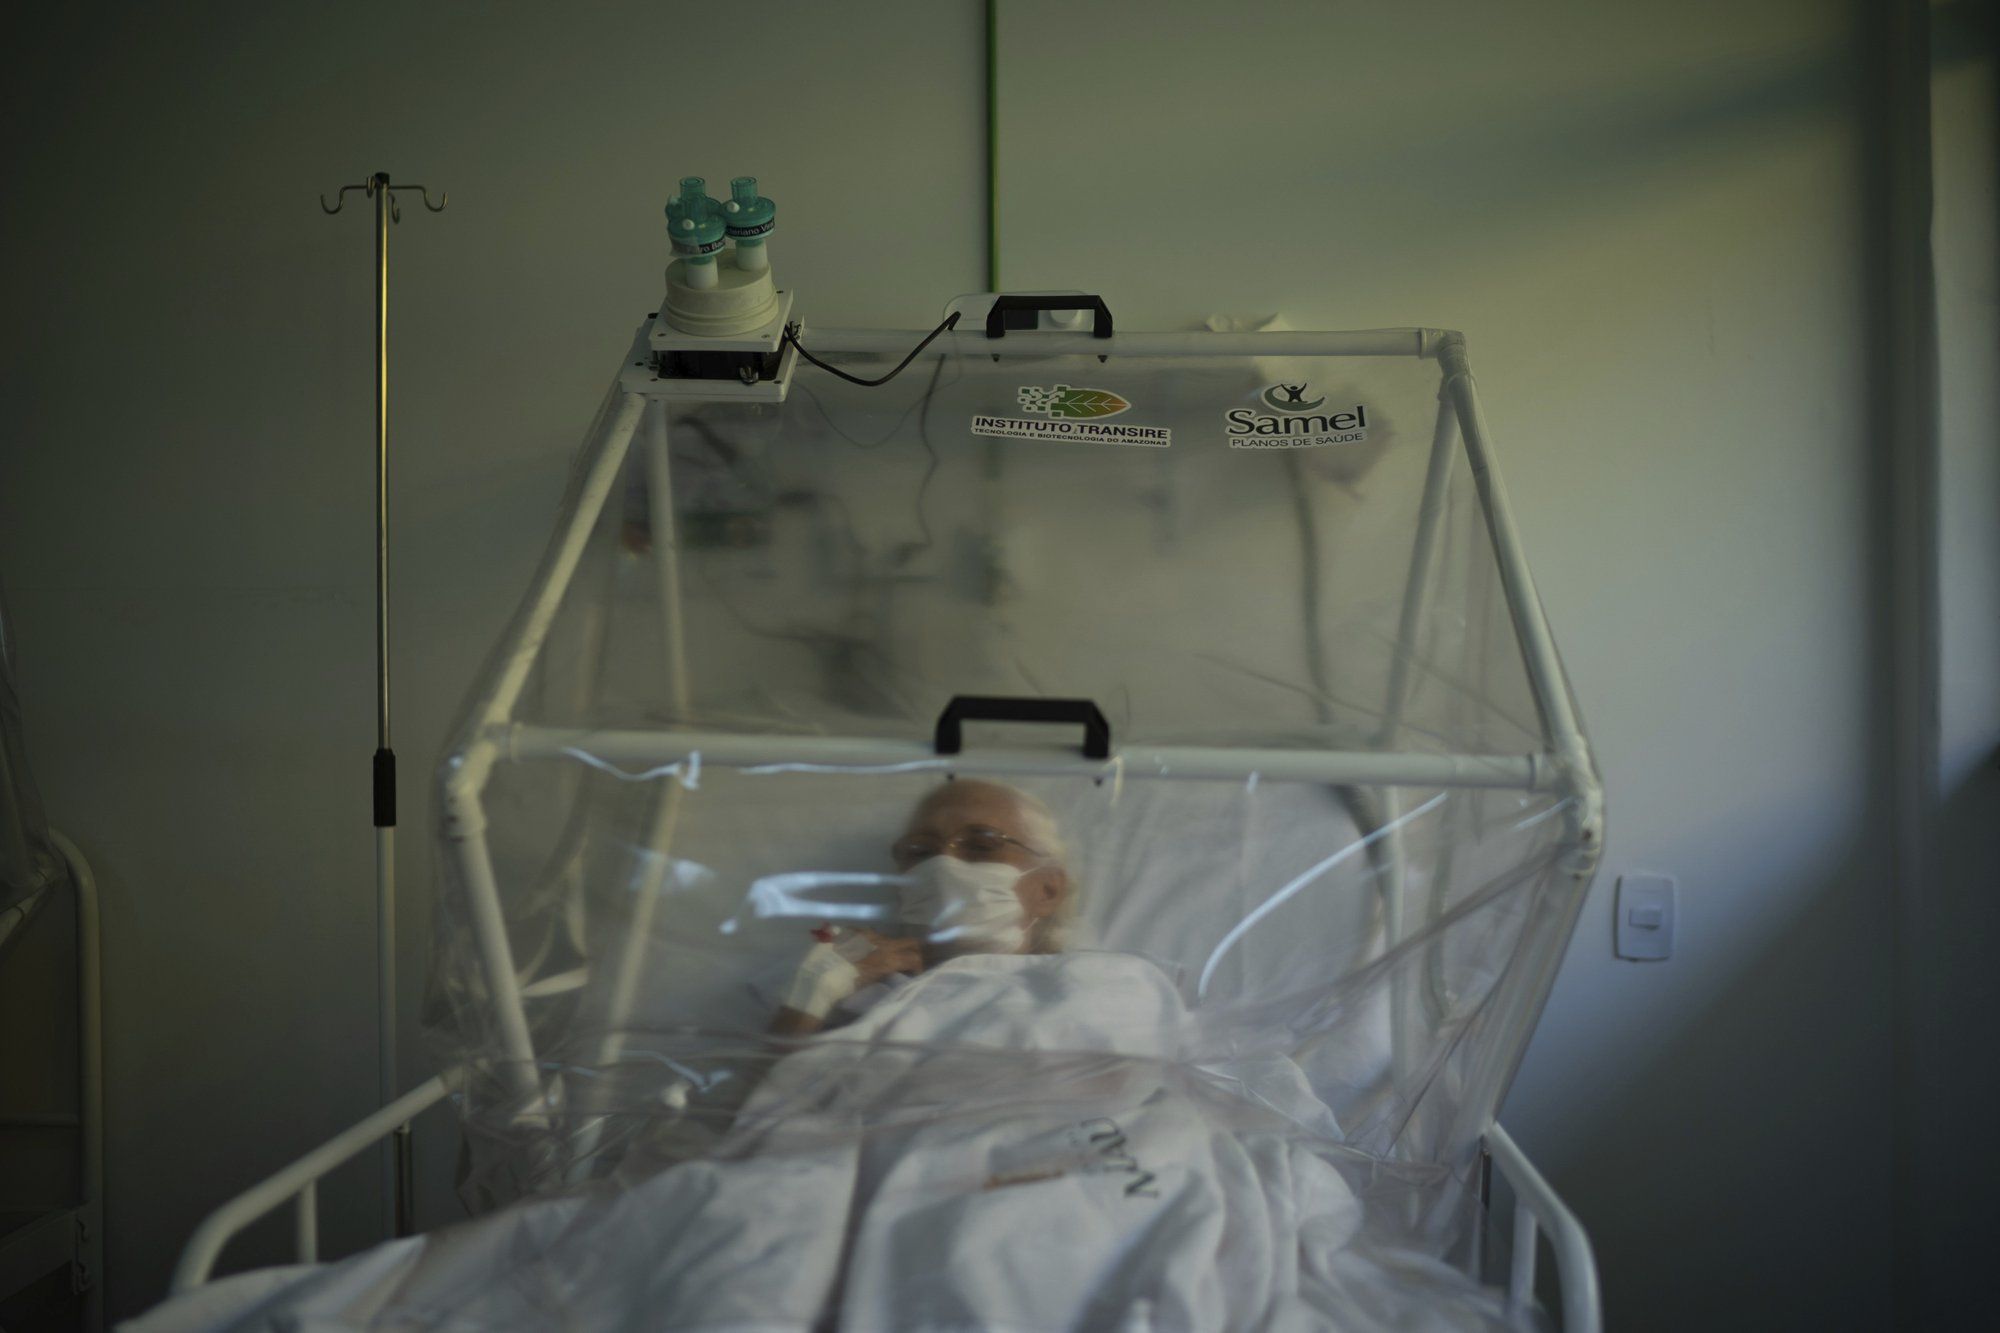 An elderly COVID-19 patient is treated inside a non-invasive ventilation system named the Vanessa Capsule at a municipal field hospital Gilberto Novaes in Manaus, Brazil, Monday, May 18, 2020. Image by Felipe Dana / AP Photo. Brazil, 2020.